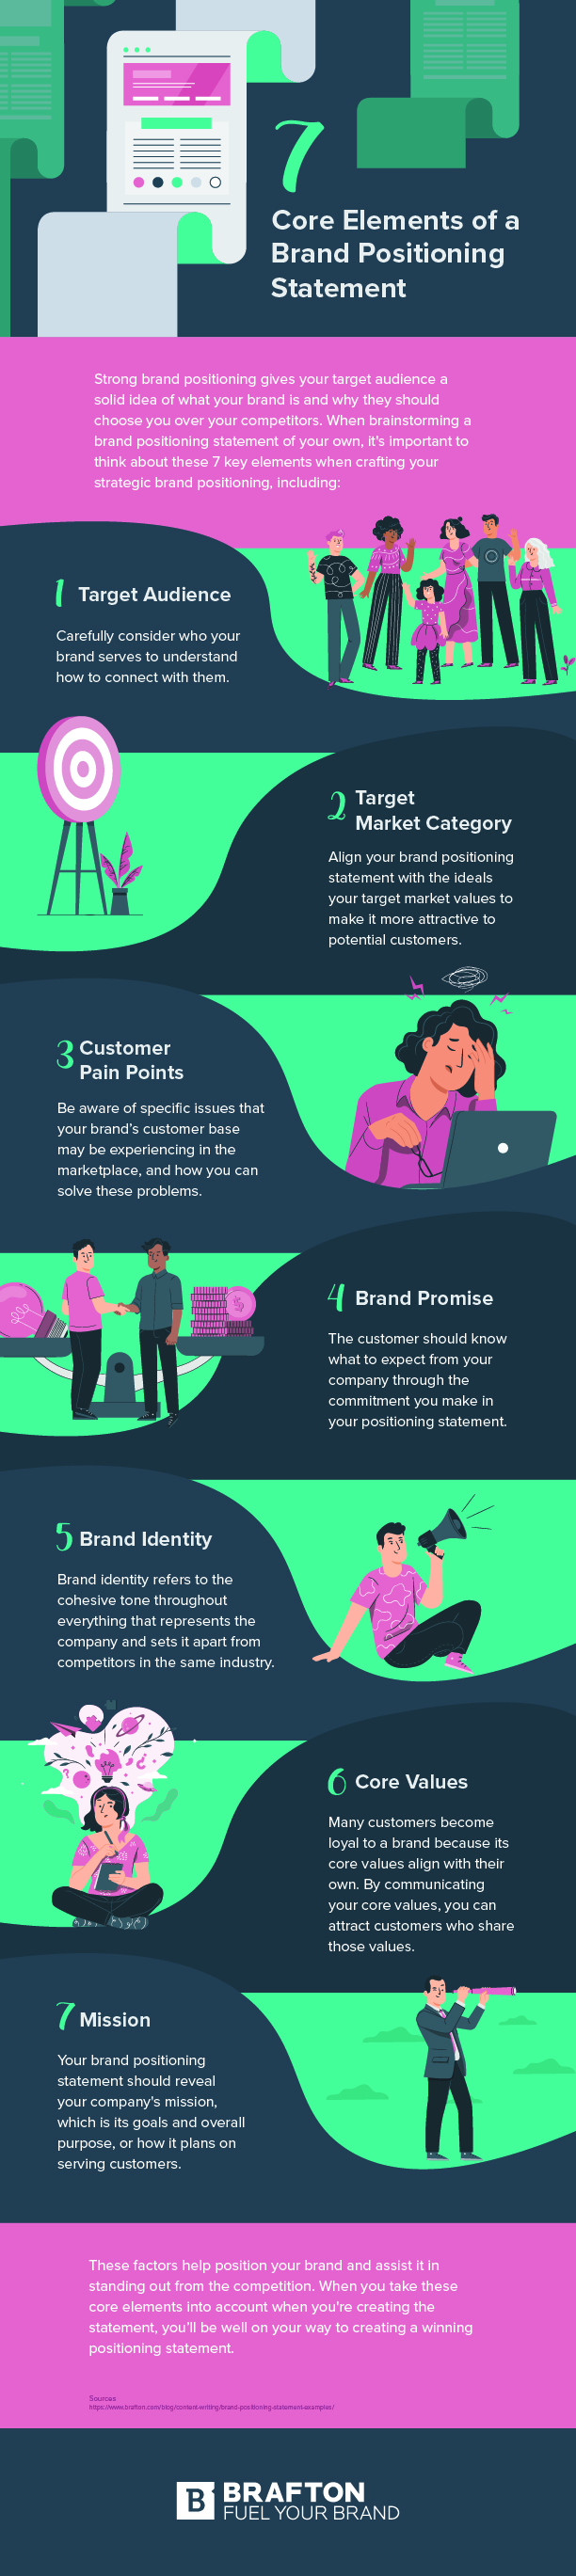 7 Core Elements of a Brand Positioning Statement Infographic